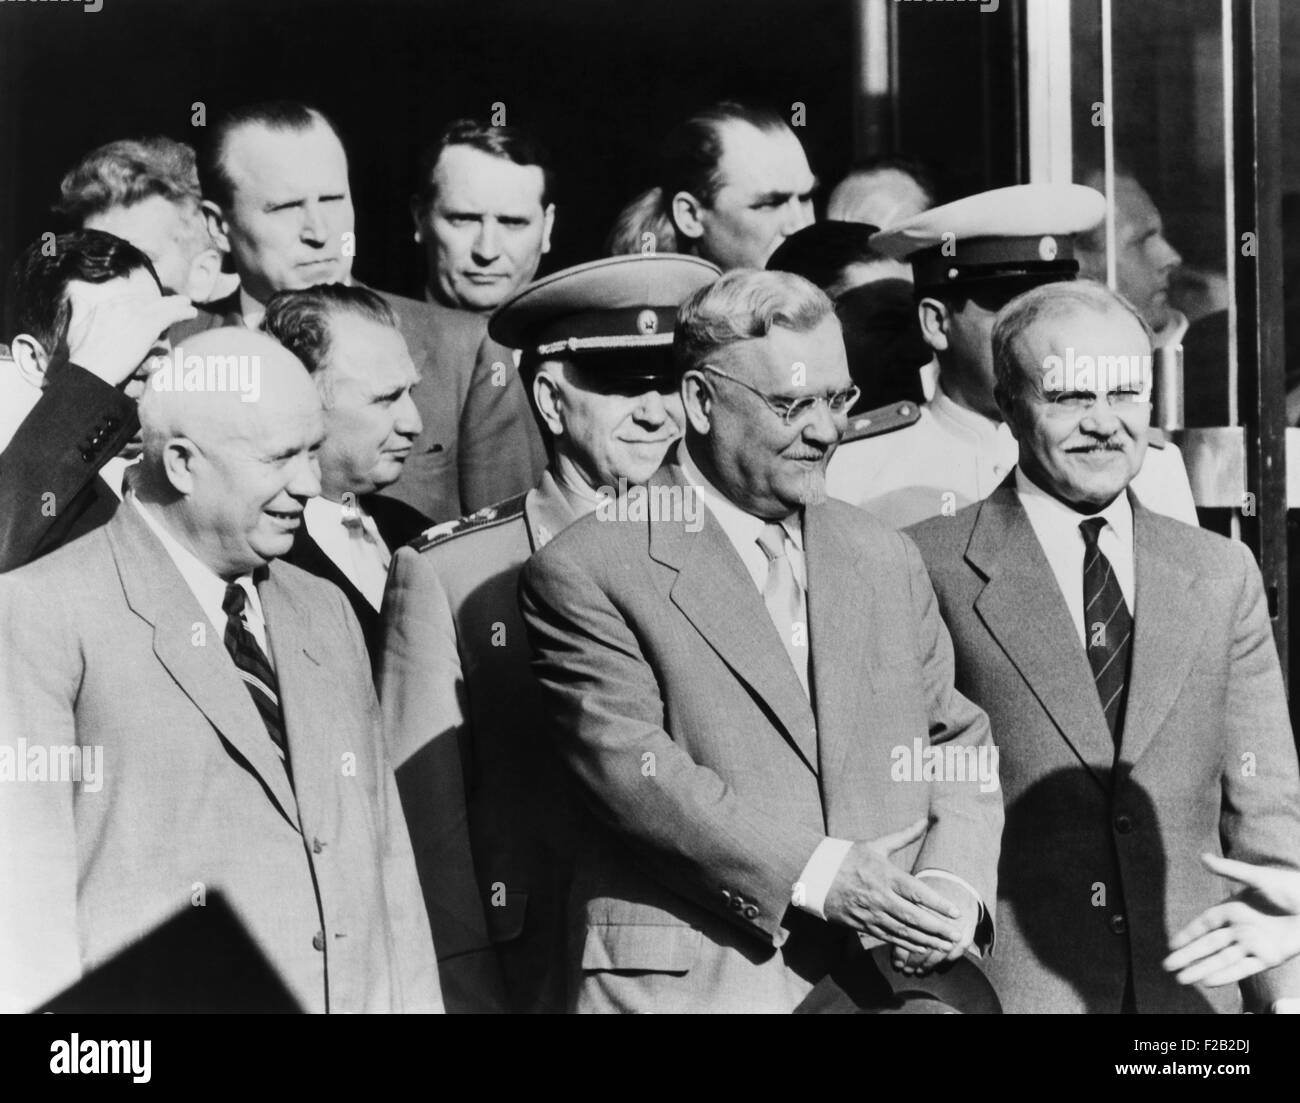 Soviet delegation leaving the Palace of Nations, Geneva, during the 'Big Four' Summit in July 1955. Front row, L-R: Nikita Khrushchev, head of the Communist Party; Nikolai Bulganin, Chairman of the Council of Ministers; and Vyacheslav Molotov, First Deputy chairman of the Council of Ministers of the Soviet Union. 2nd Row, L-R: Andrei Gromyko (shielding face); Yakov Malik; and Marshal Georgy Zhukov, Minister of Defense. (CSU 2015 8 561) Stock Photo